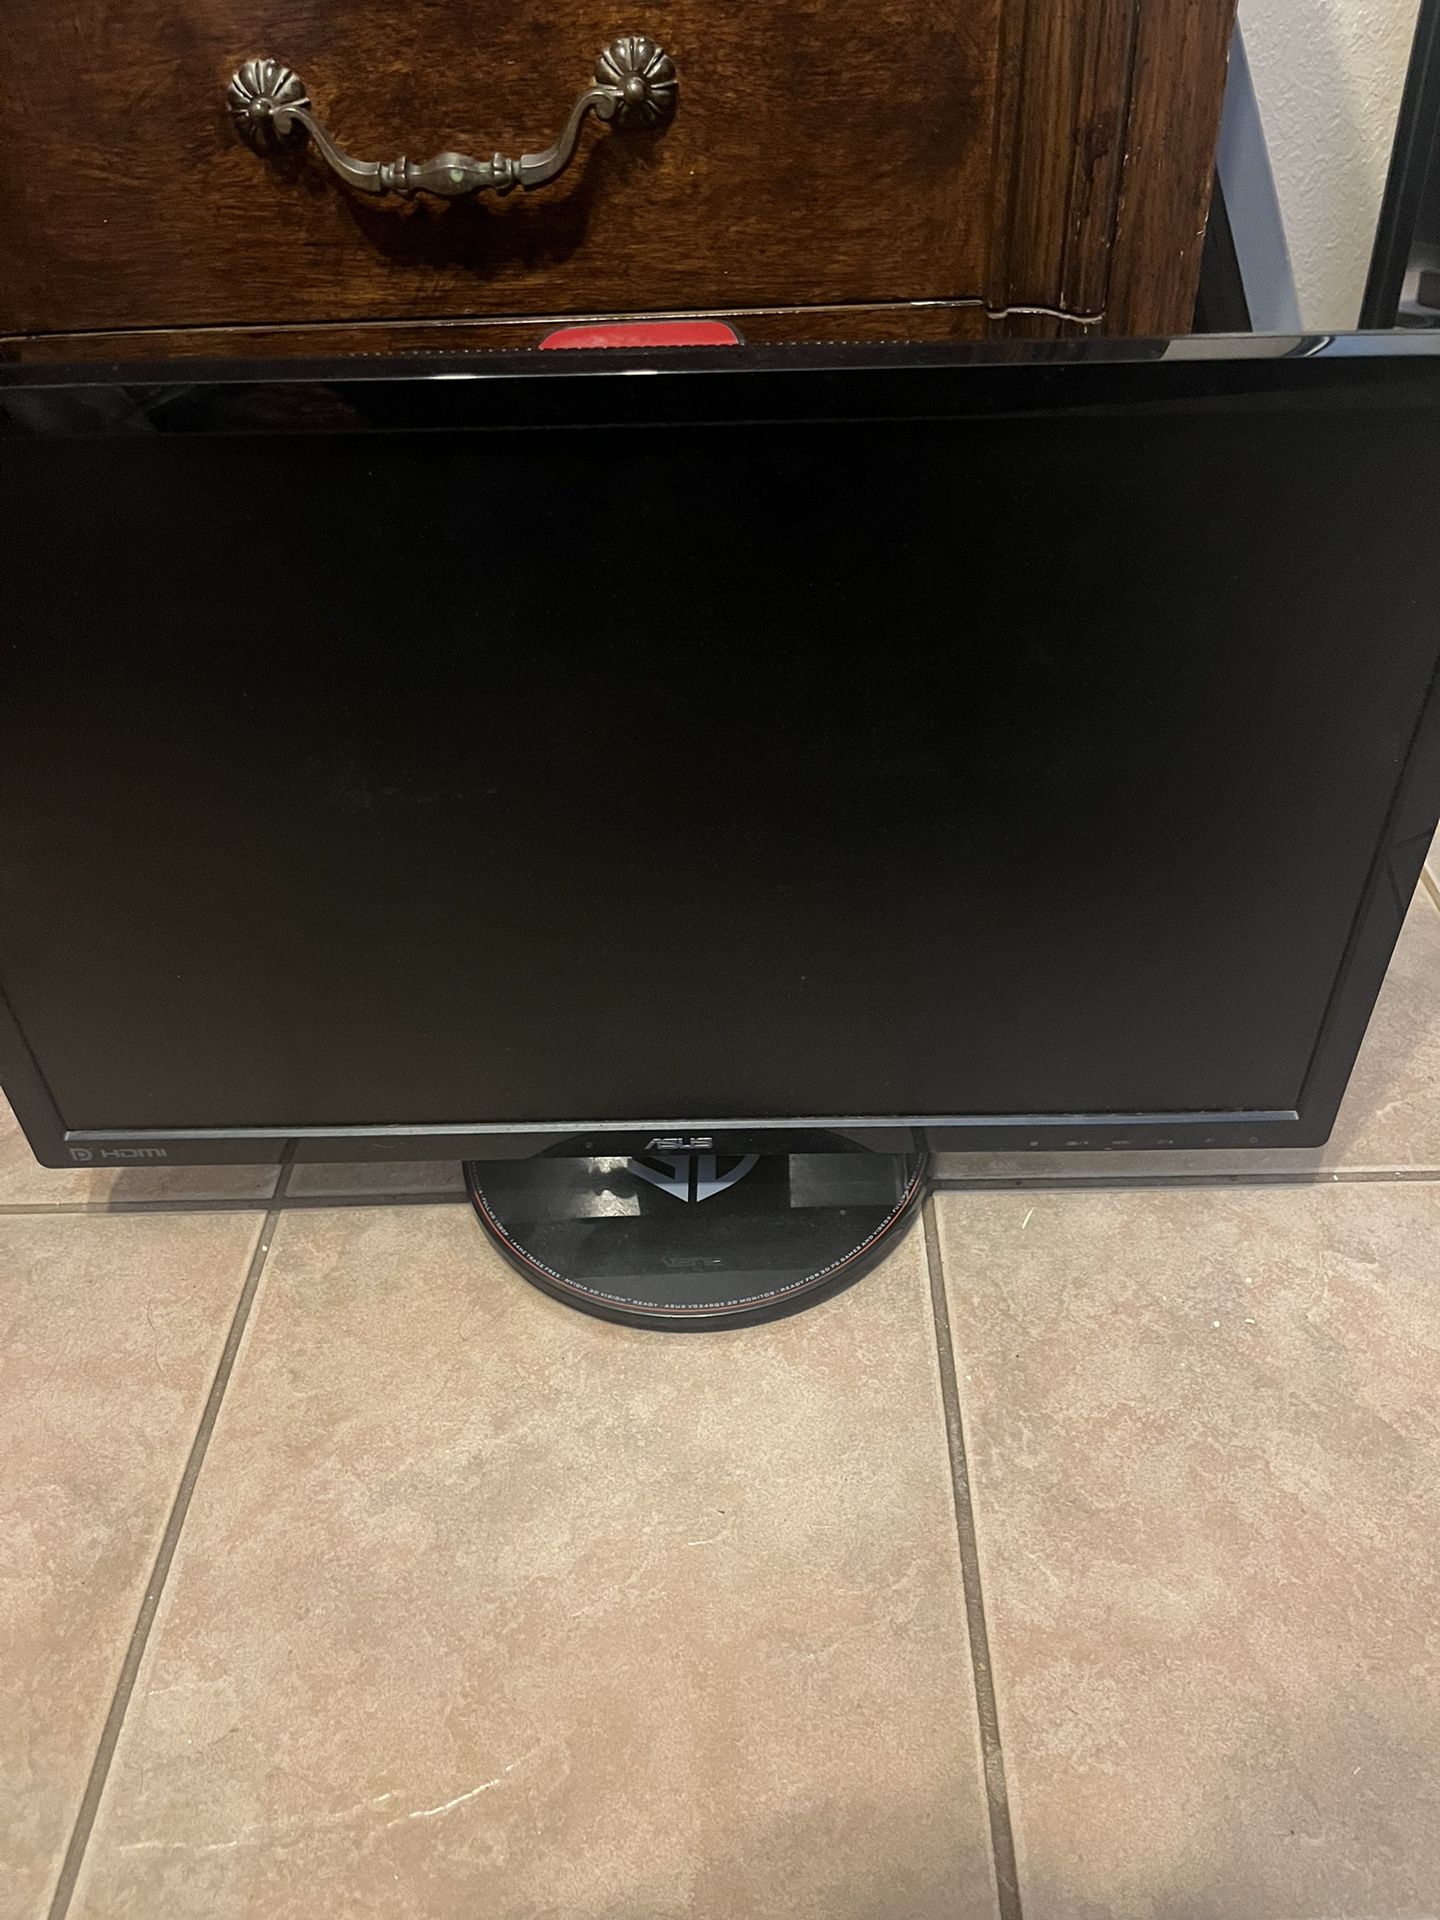 asus 24 inch 144hz monitor